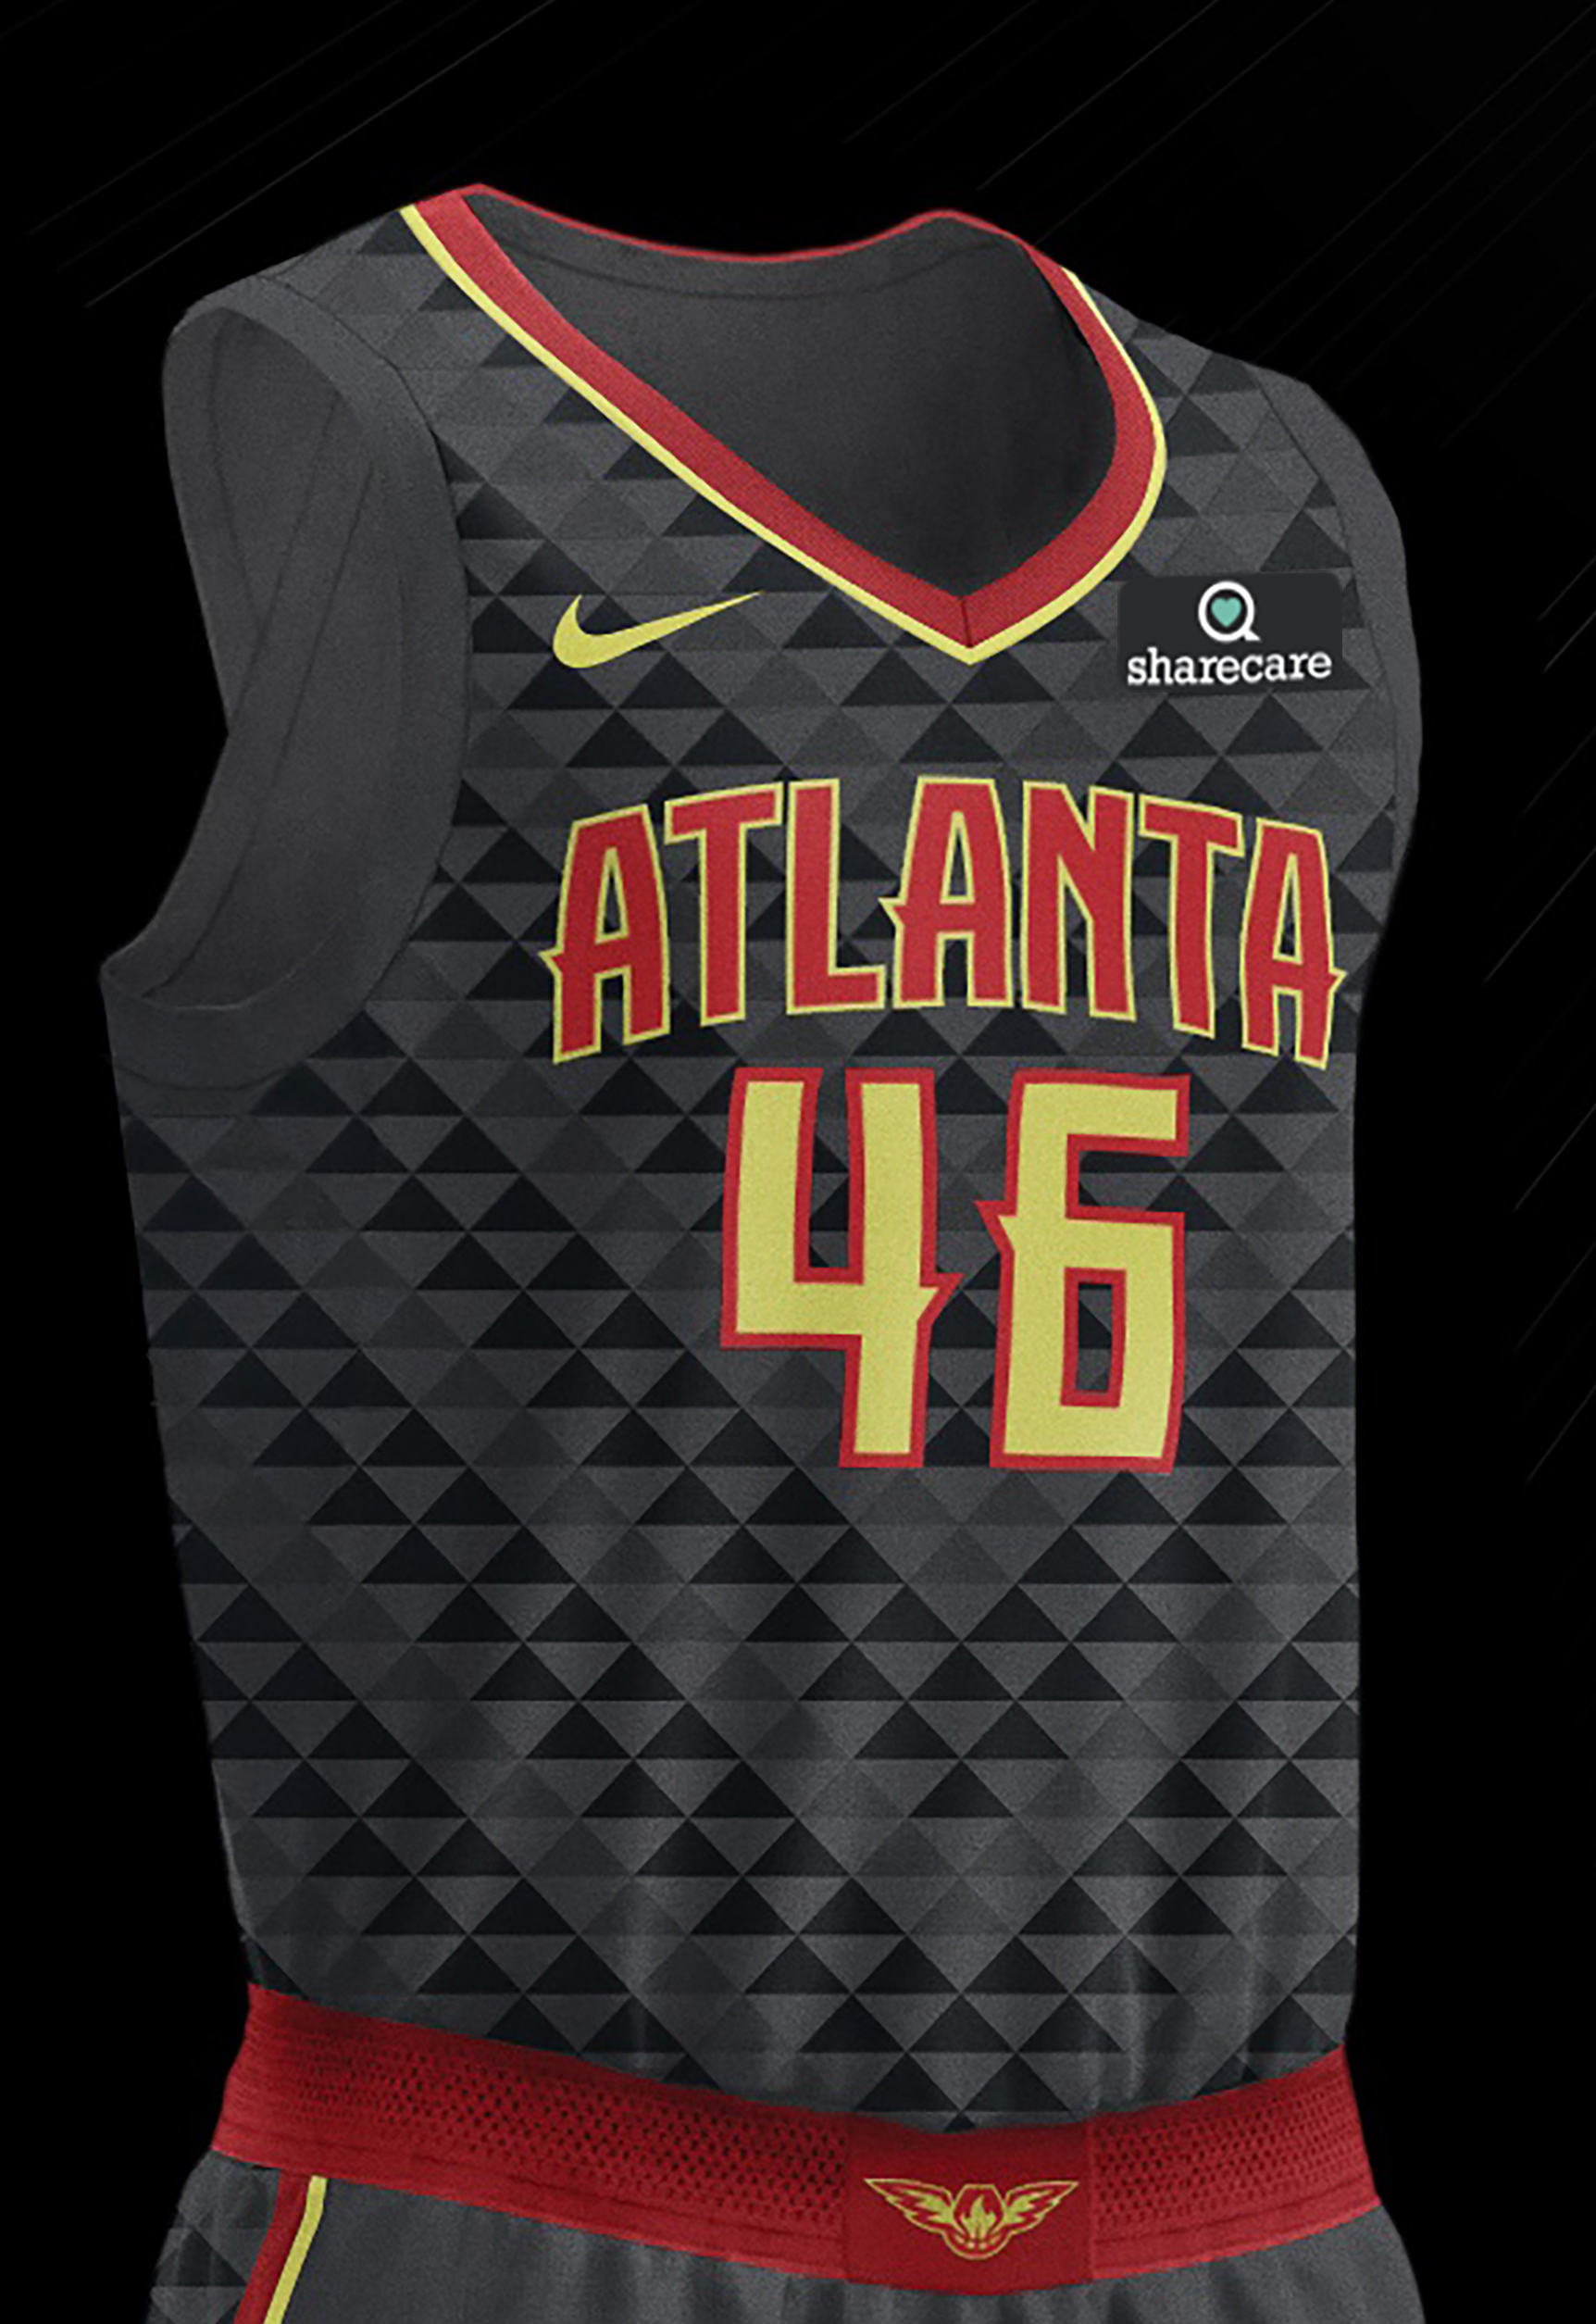 Atlanta Hawks secure Excel to sell jersey patch